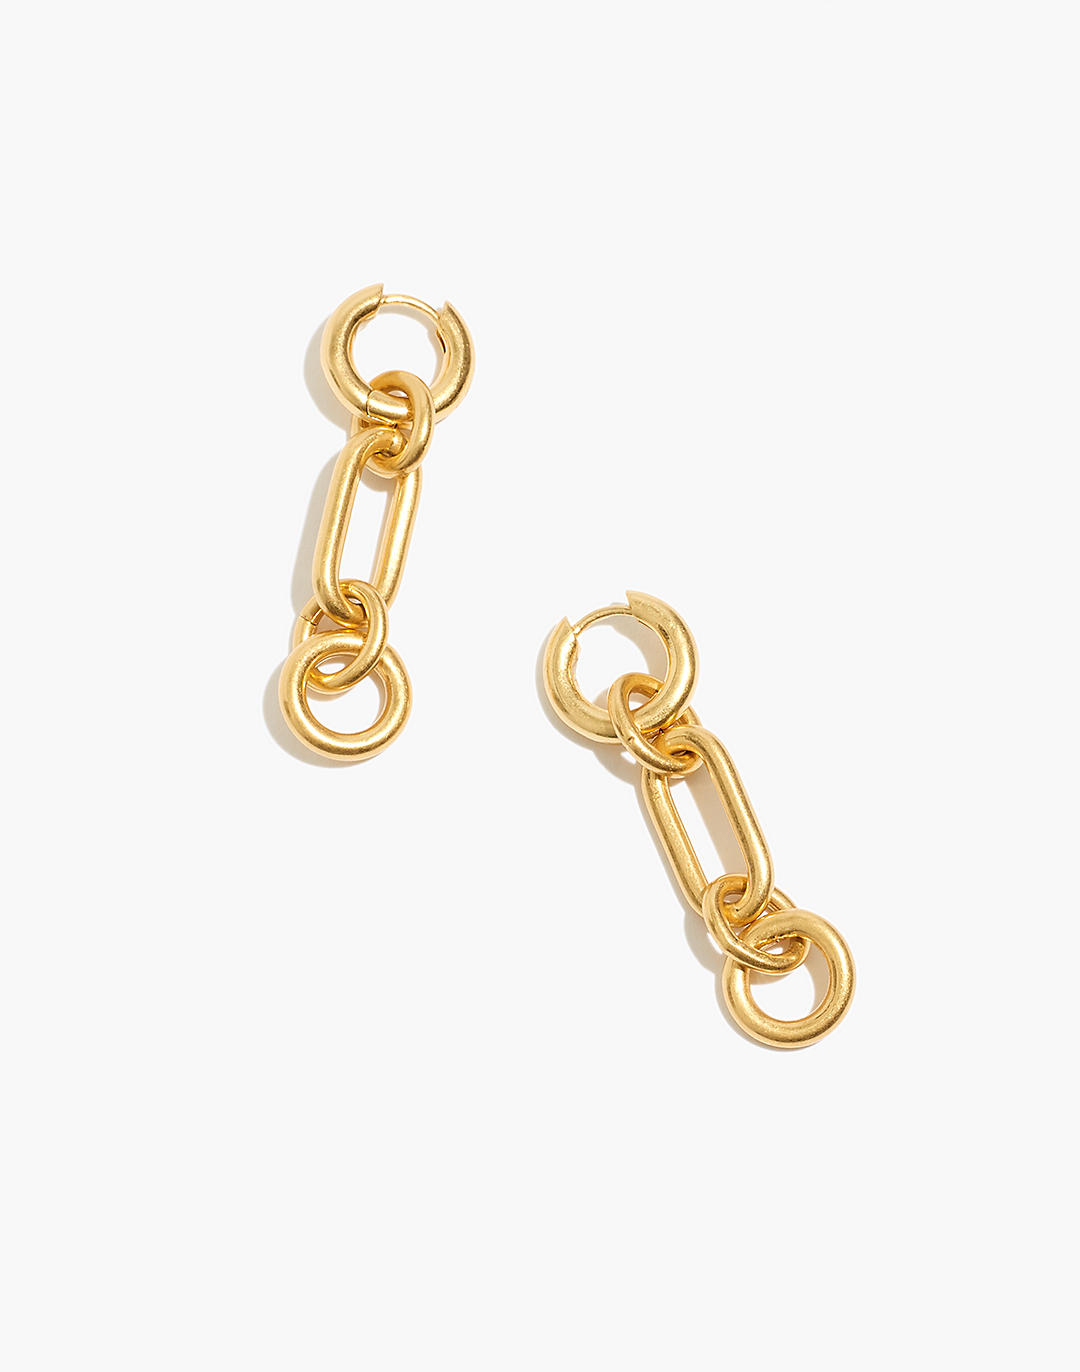 Link Layer Earrings in vintage gold image 1